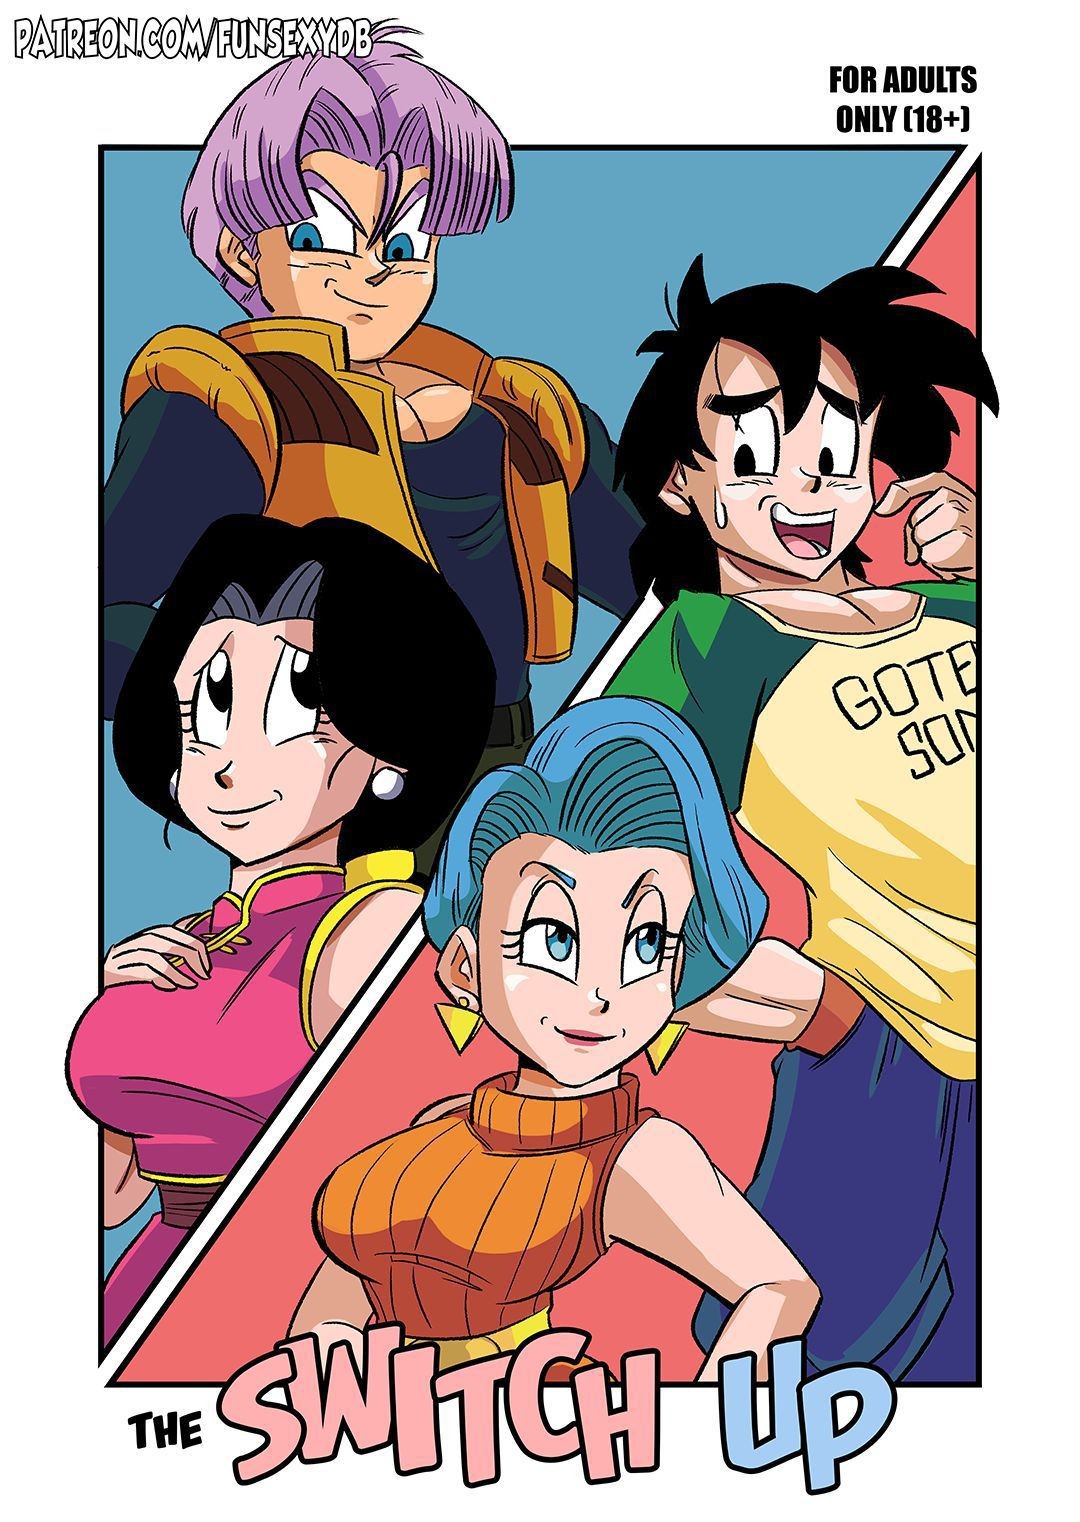 Natural Tits The Switch Up (Dragon Ball Z) [FULL COLORIZED] (Portuguese-BR) Mamada